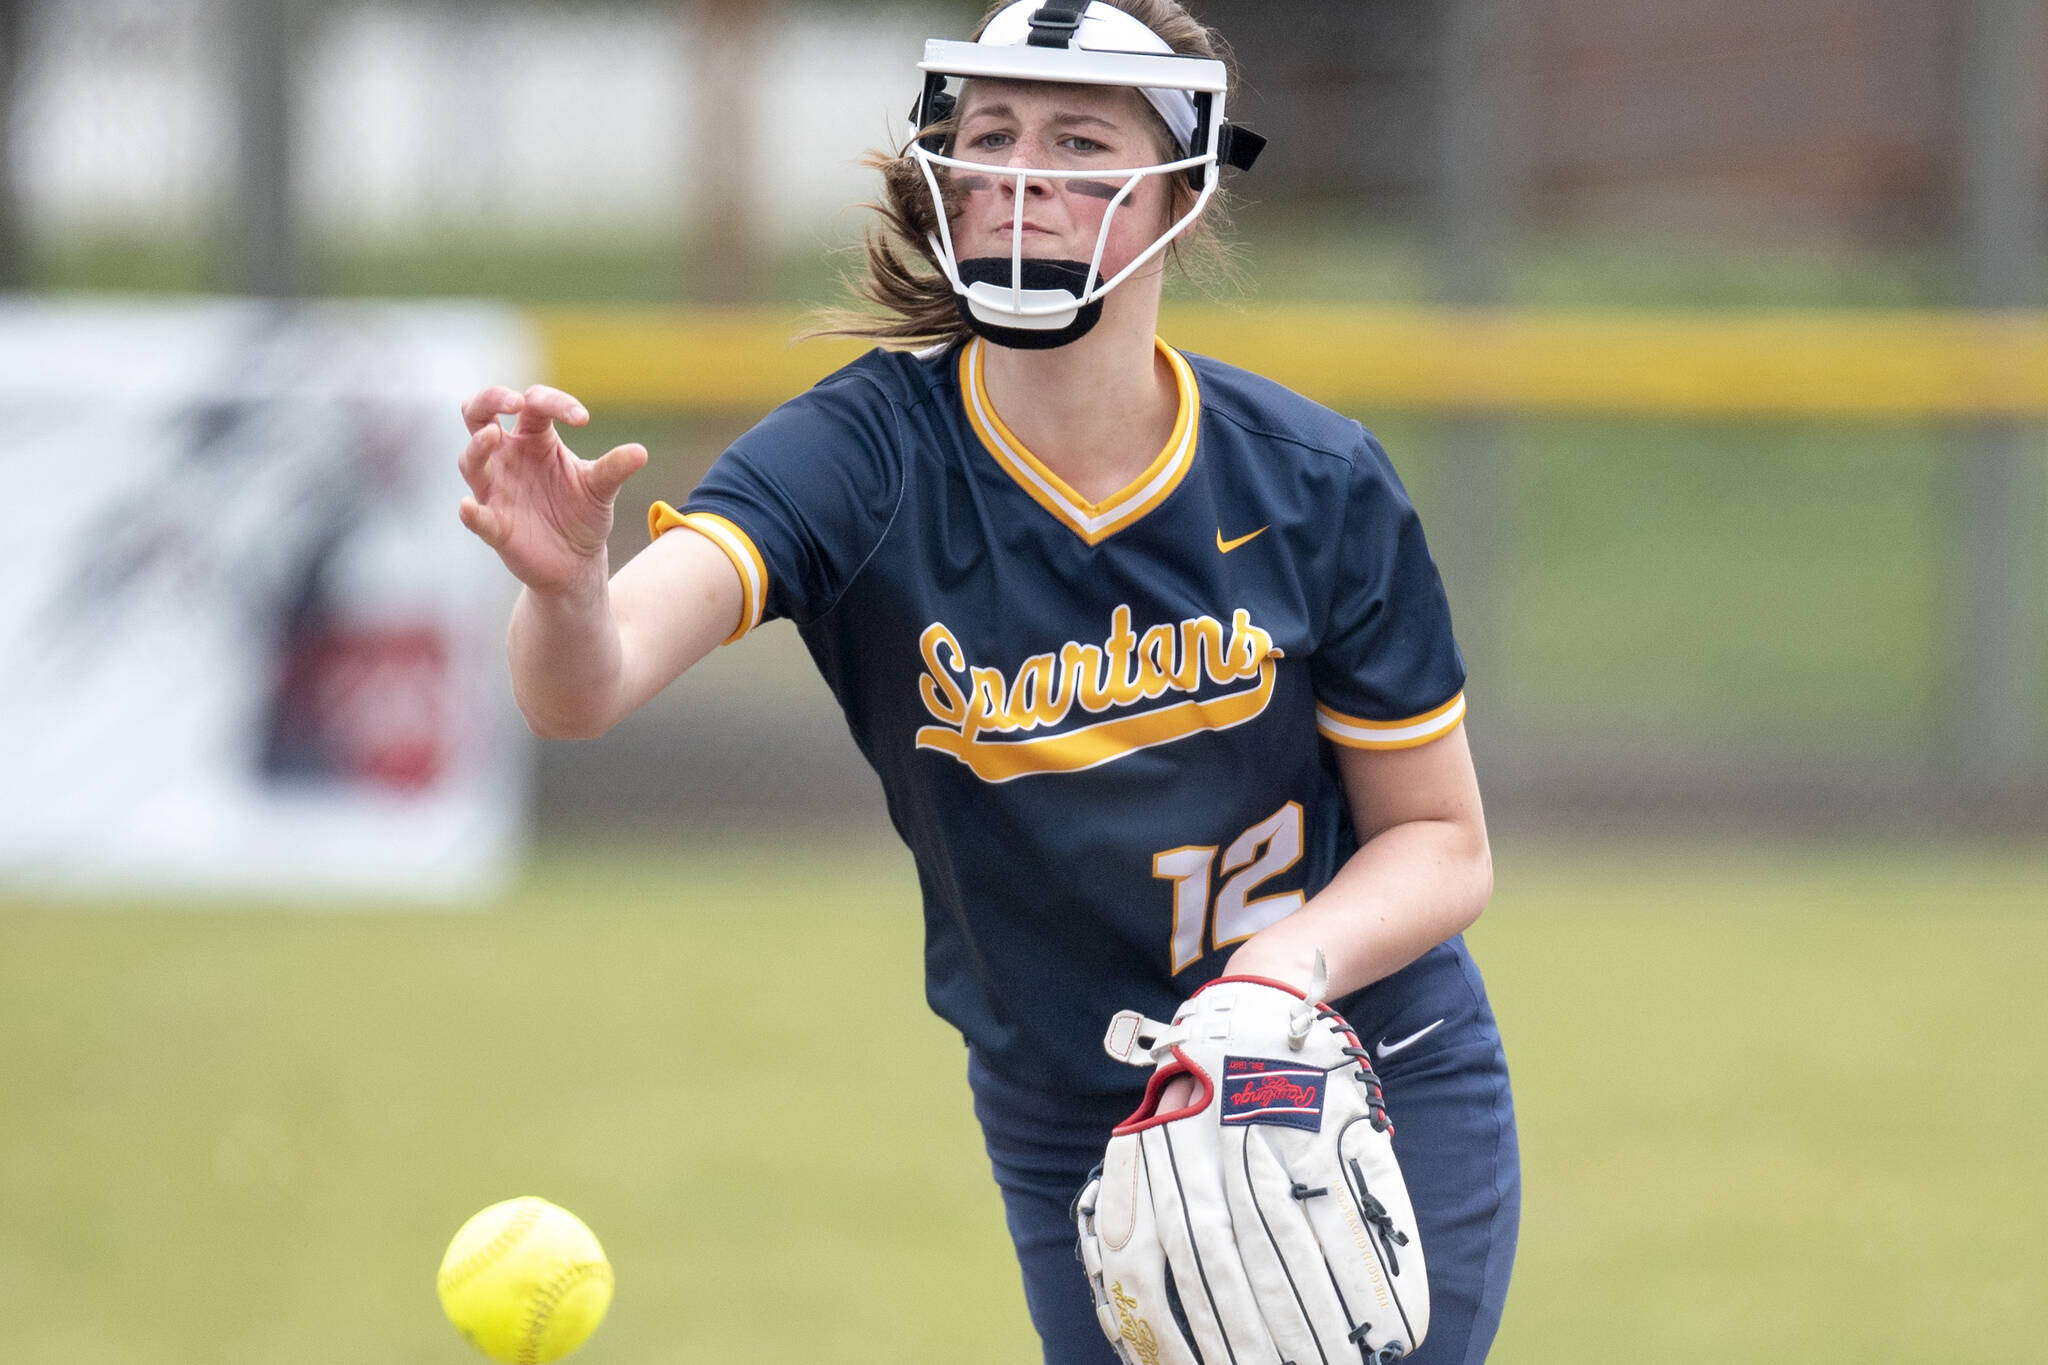 Forks' Chloe Gaydeski-St. John delivers a pitch against Pe Ell/Willapa Valley on Friday in Pe Ell. The Spartans' three-game win streak was snapped in a doubleheader sweep by Pe Ell/Willapa Valley, the top team in the Pacific 2B League. (Eric Trent/The Chronicle)